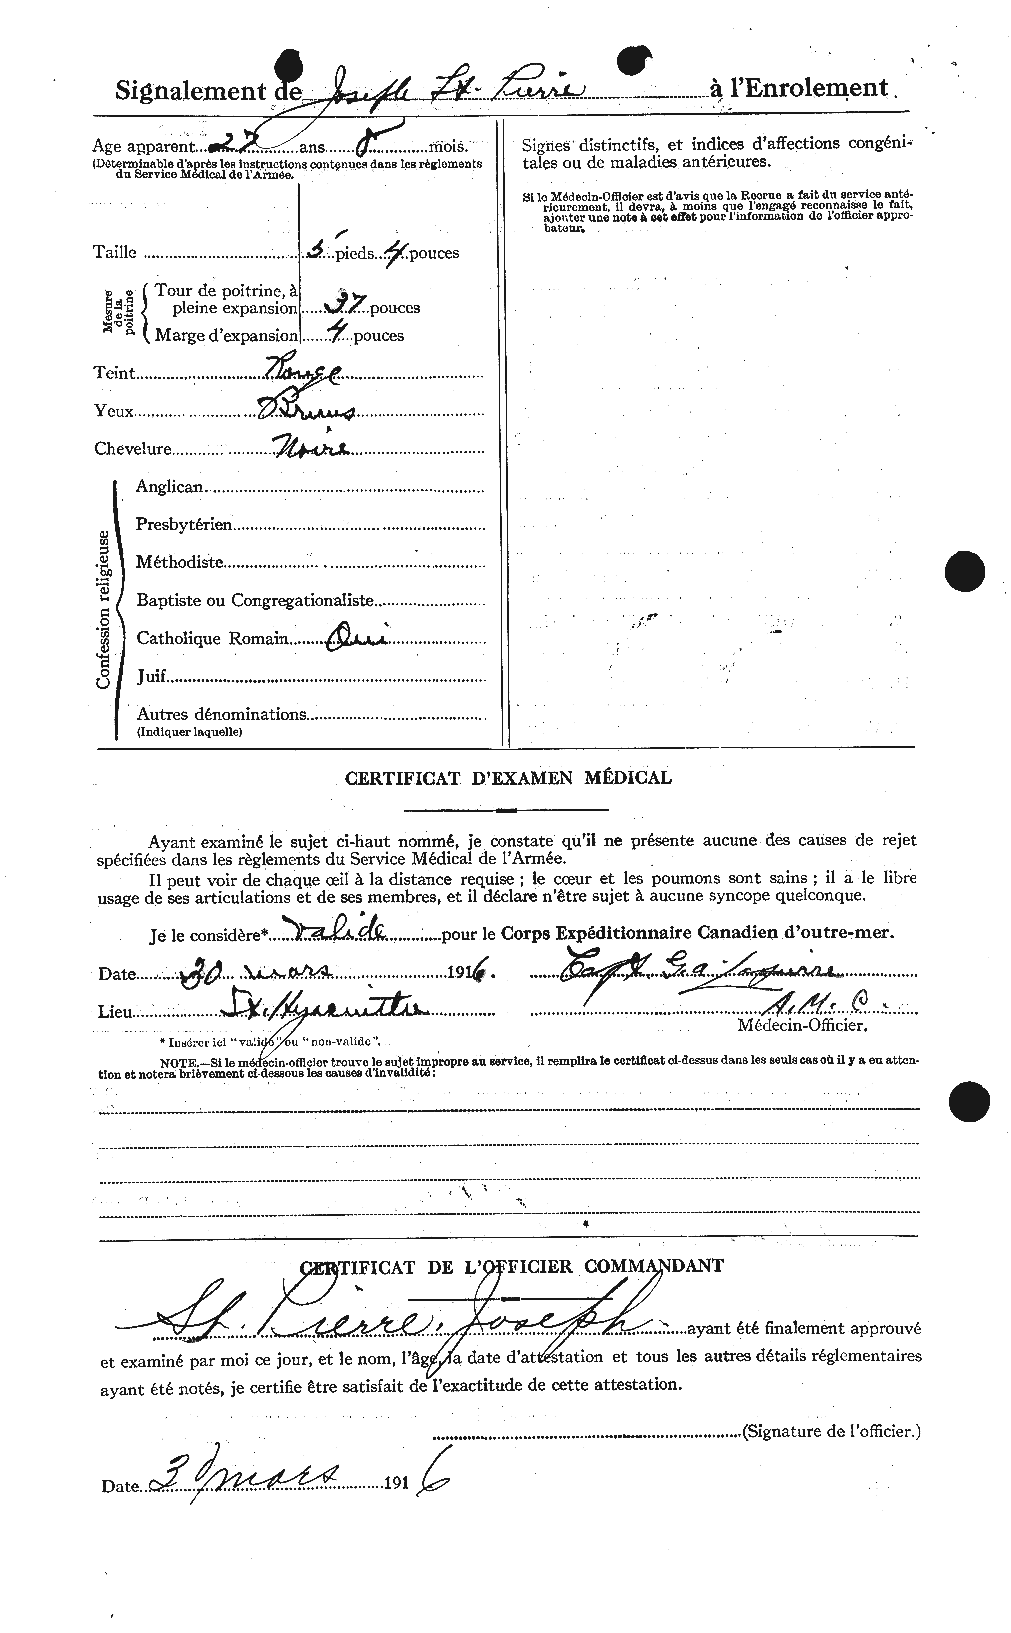 Personnel Records of the First World War - CEF 077682b